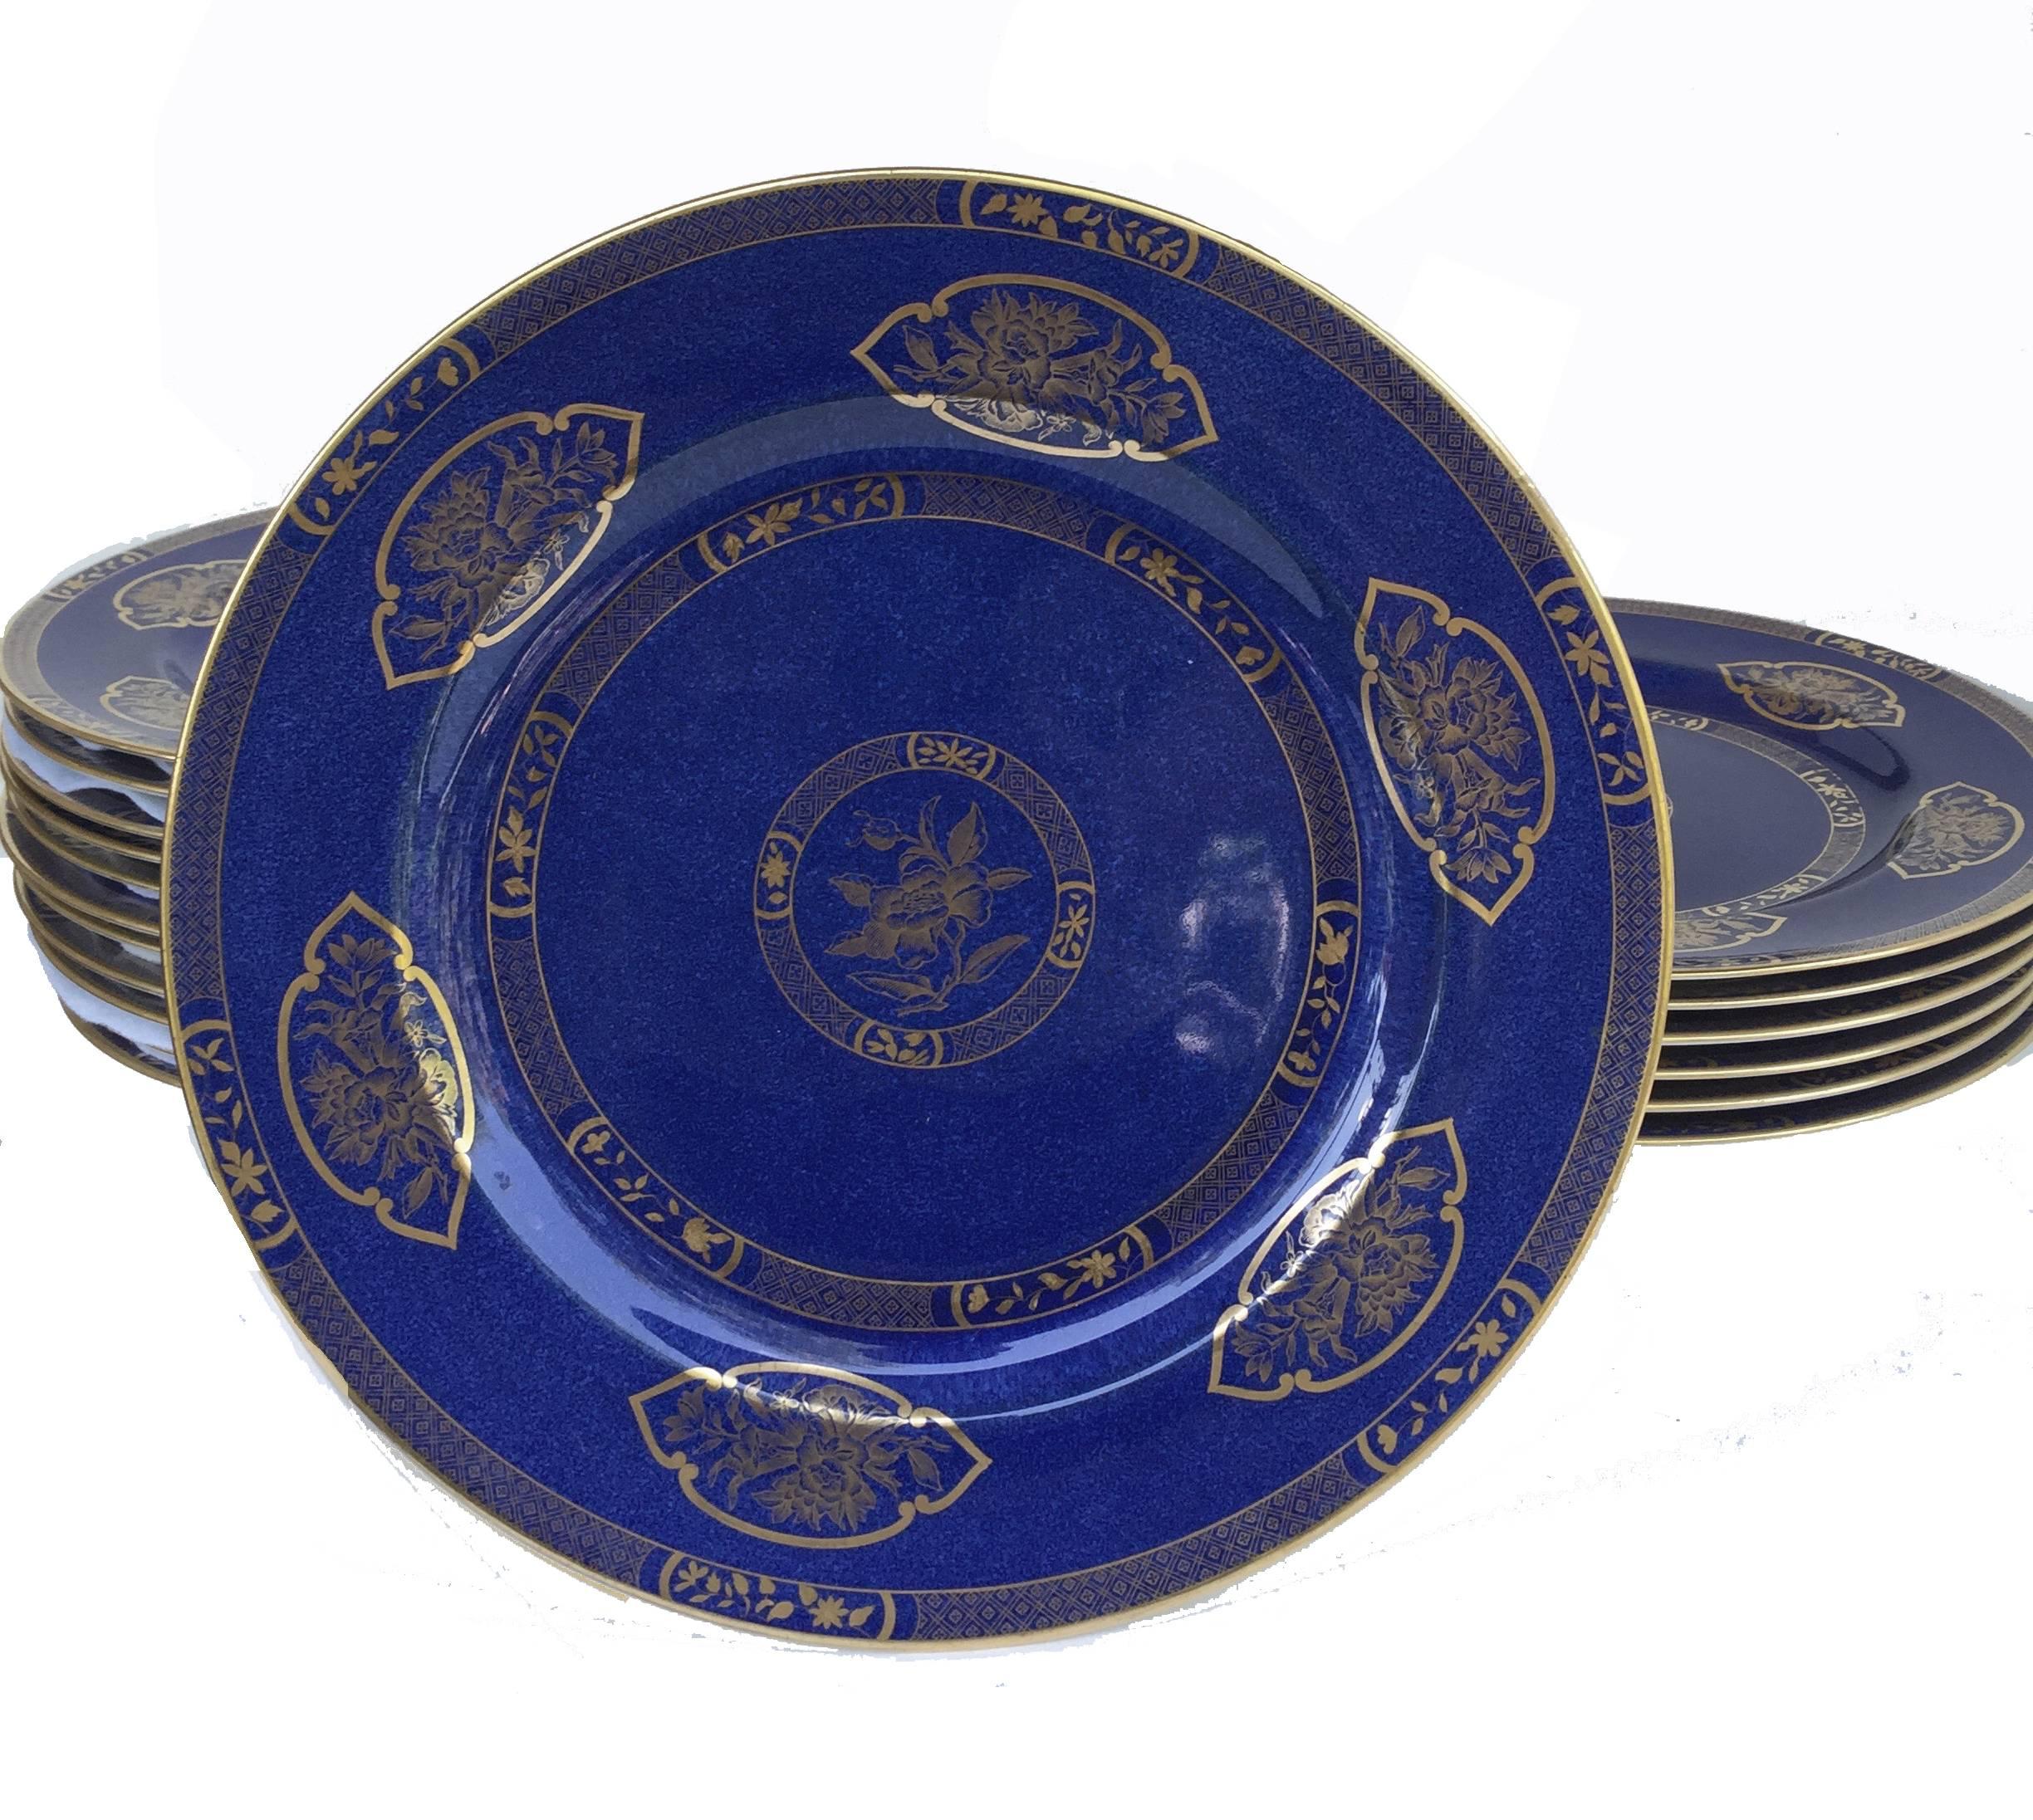 Wedgwood bone China set of 18 dinner plates, circa 1900, all of powder-blue ground, painted in gilt monochrome with chinoiserie pattern 8950, the rim and cavetto painted in gold with a band of cell-and-diaper border, alternating with stylized